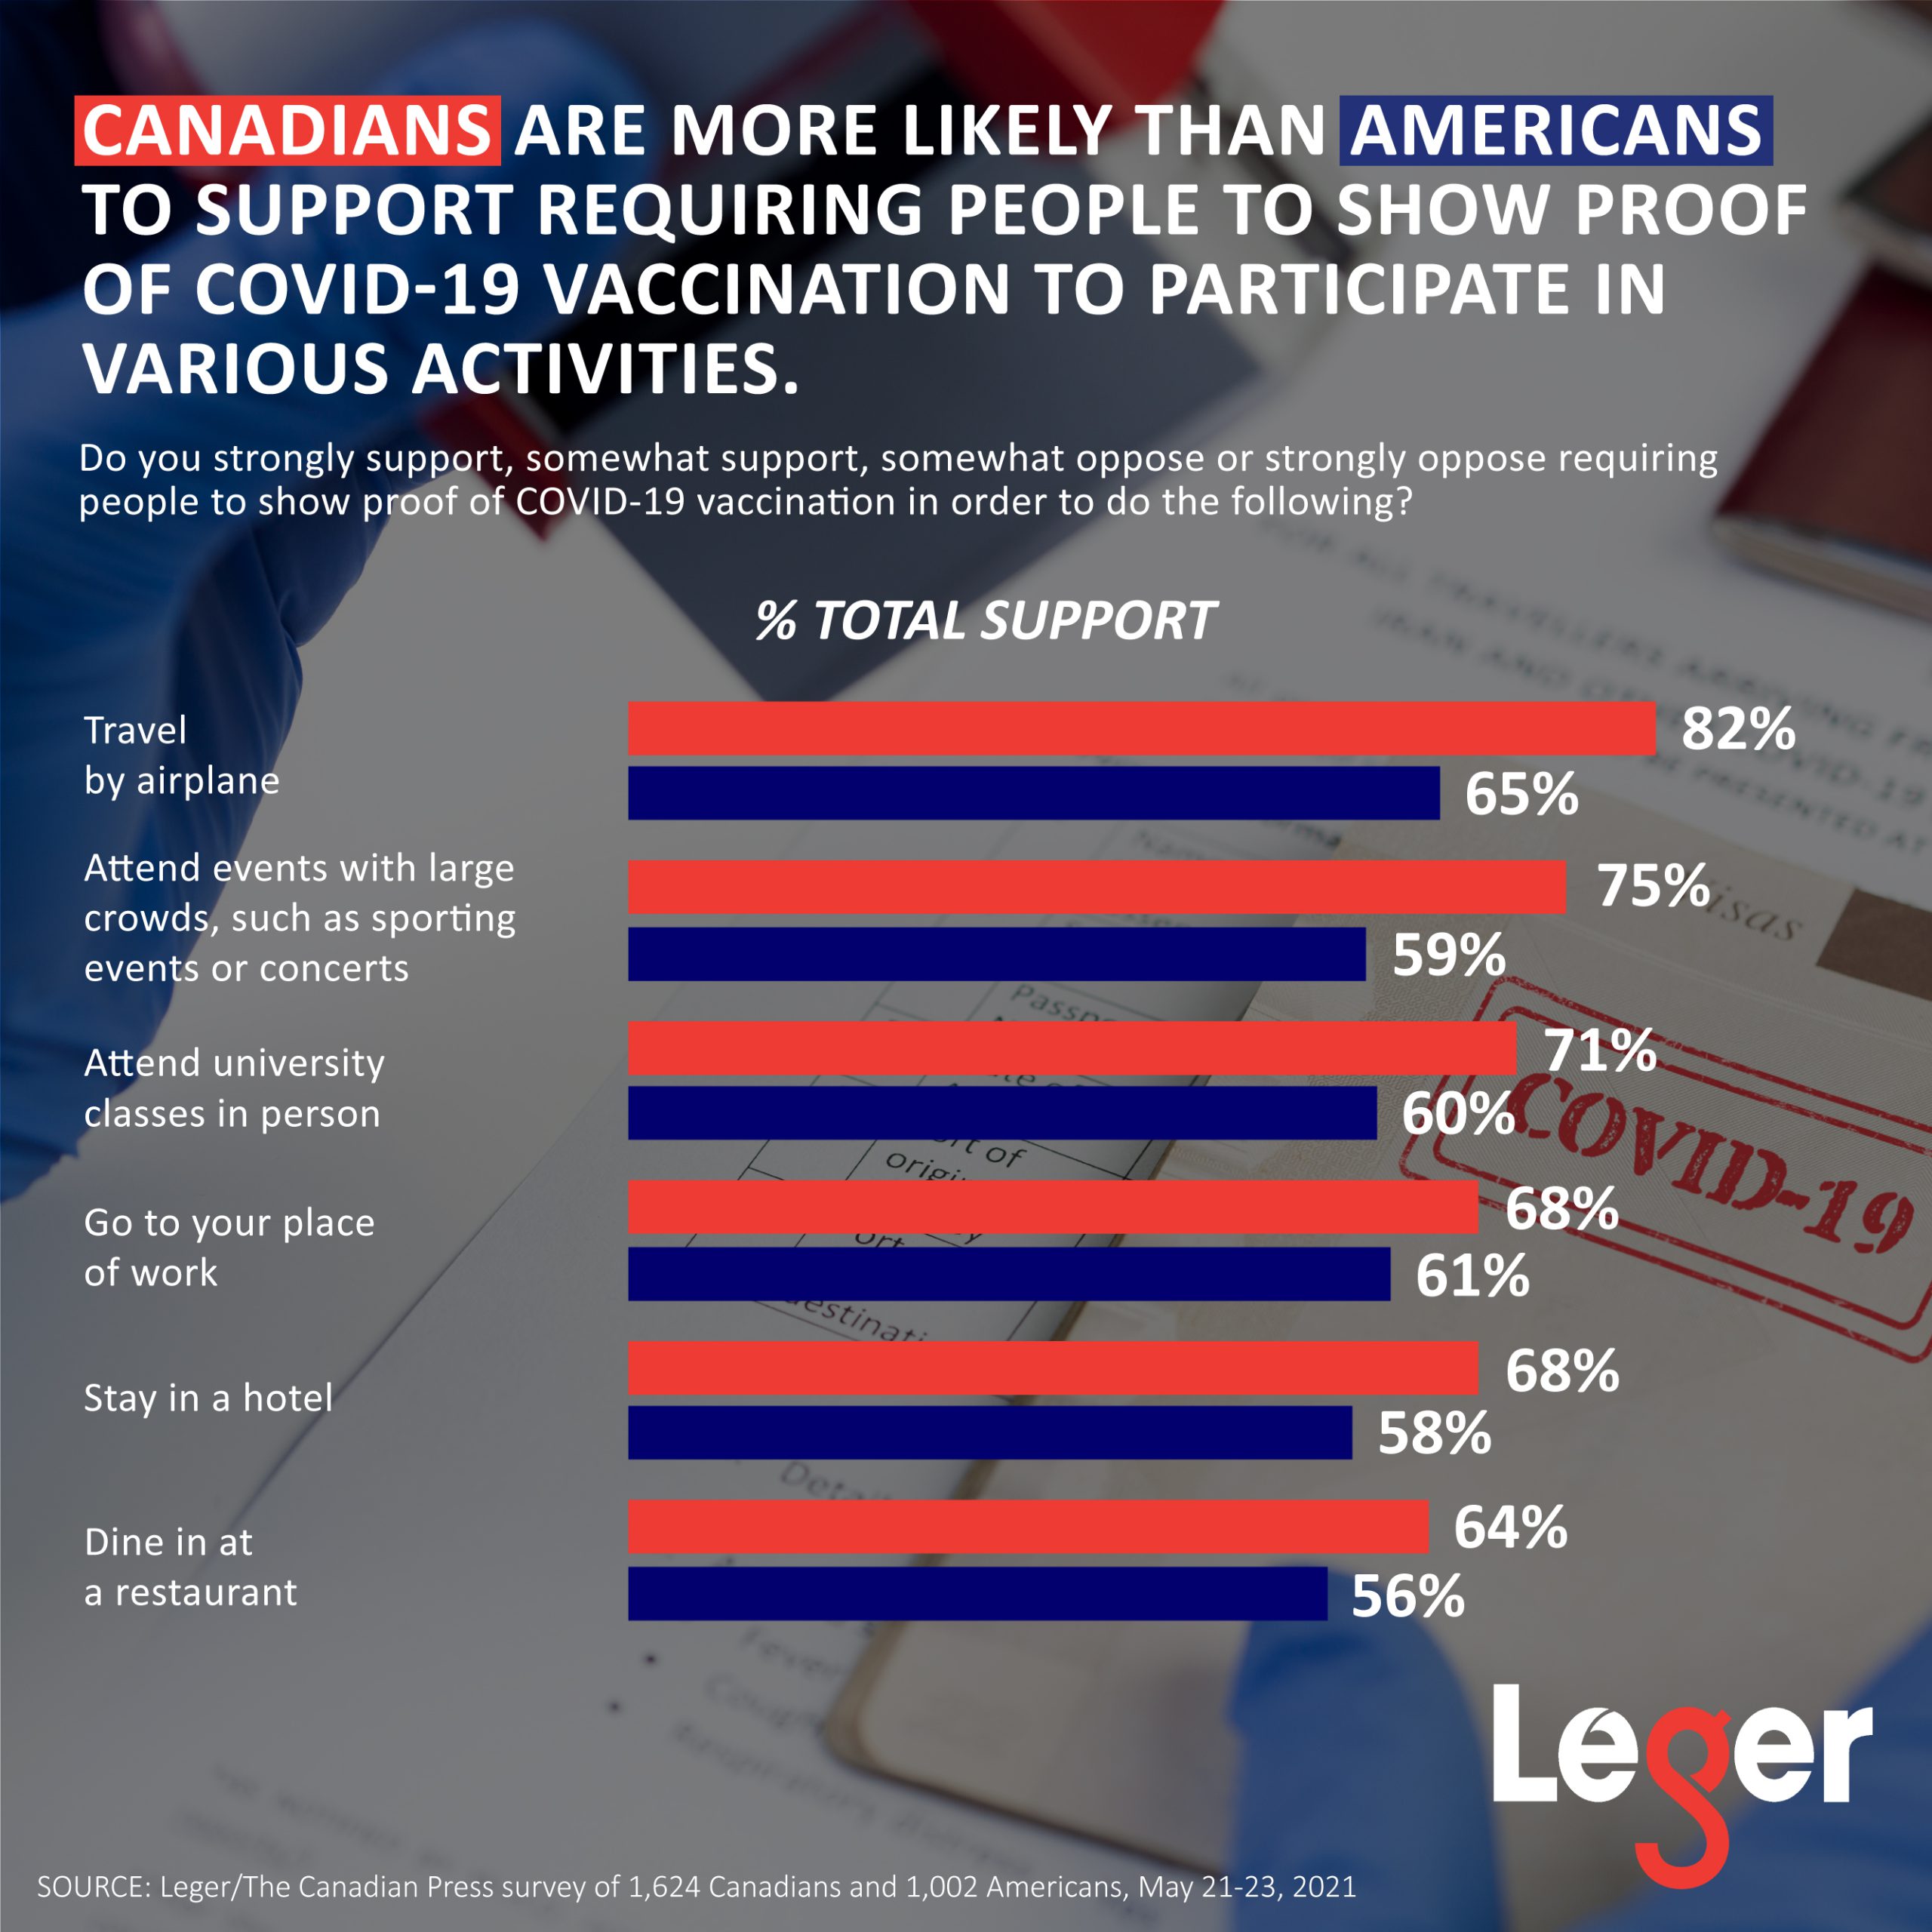 Canadians are more likely than Americans to support requiring people to show proof of COVID-19 vaccination to participate in various activities.